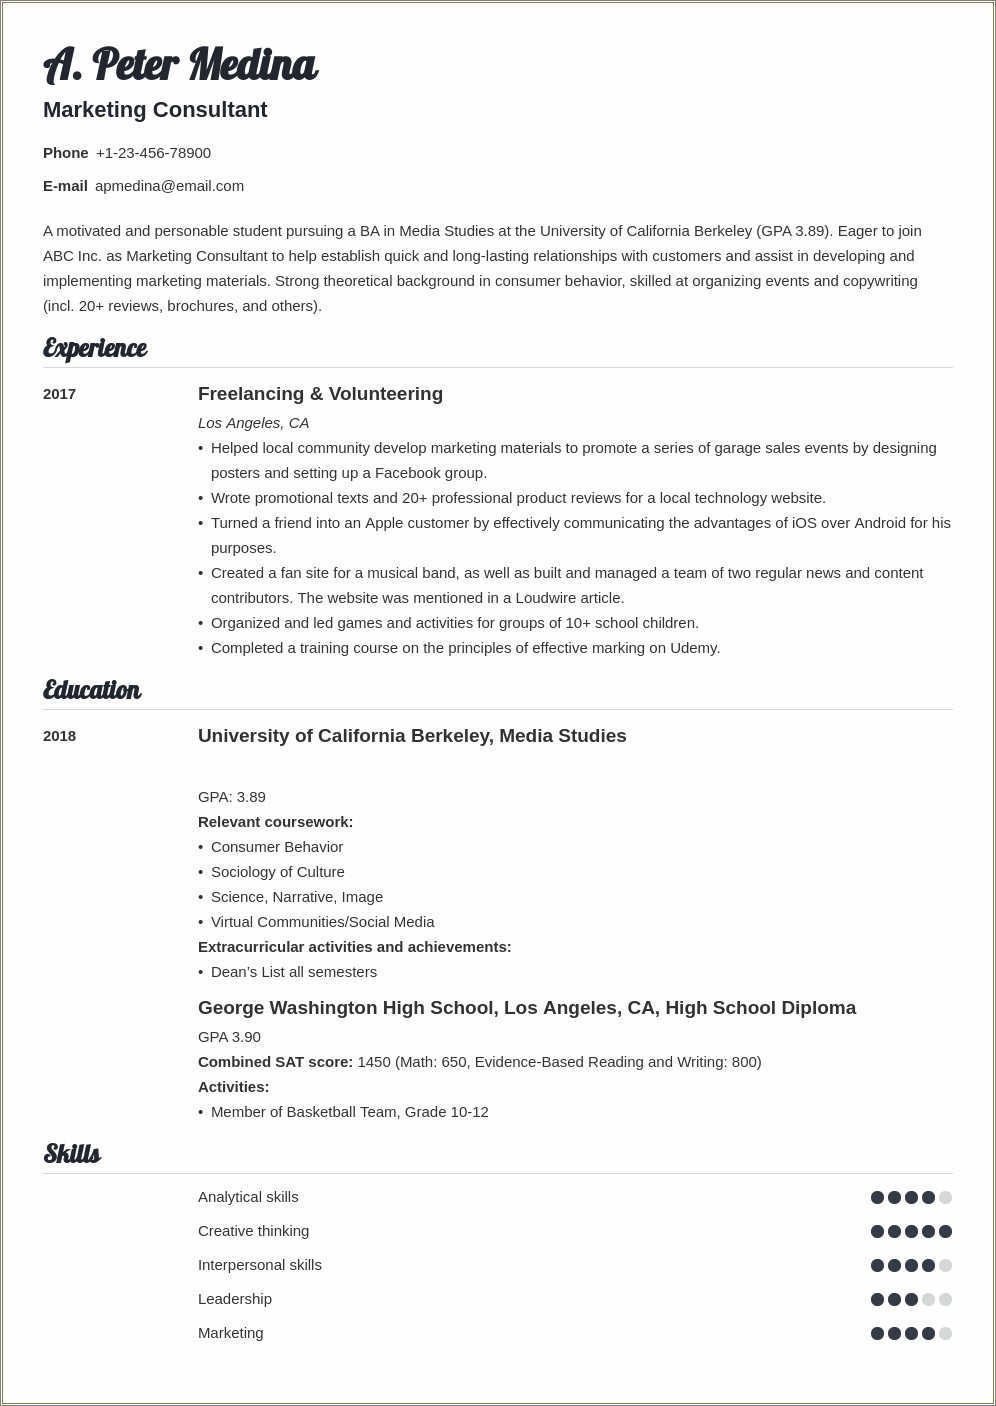 Getting Entry Level Job With No Resume